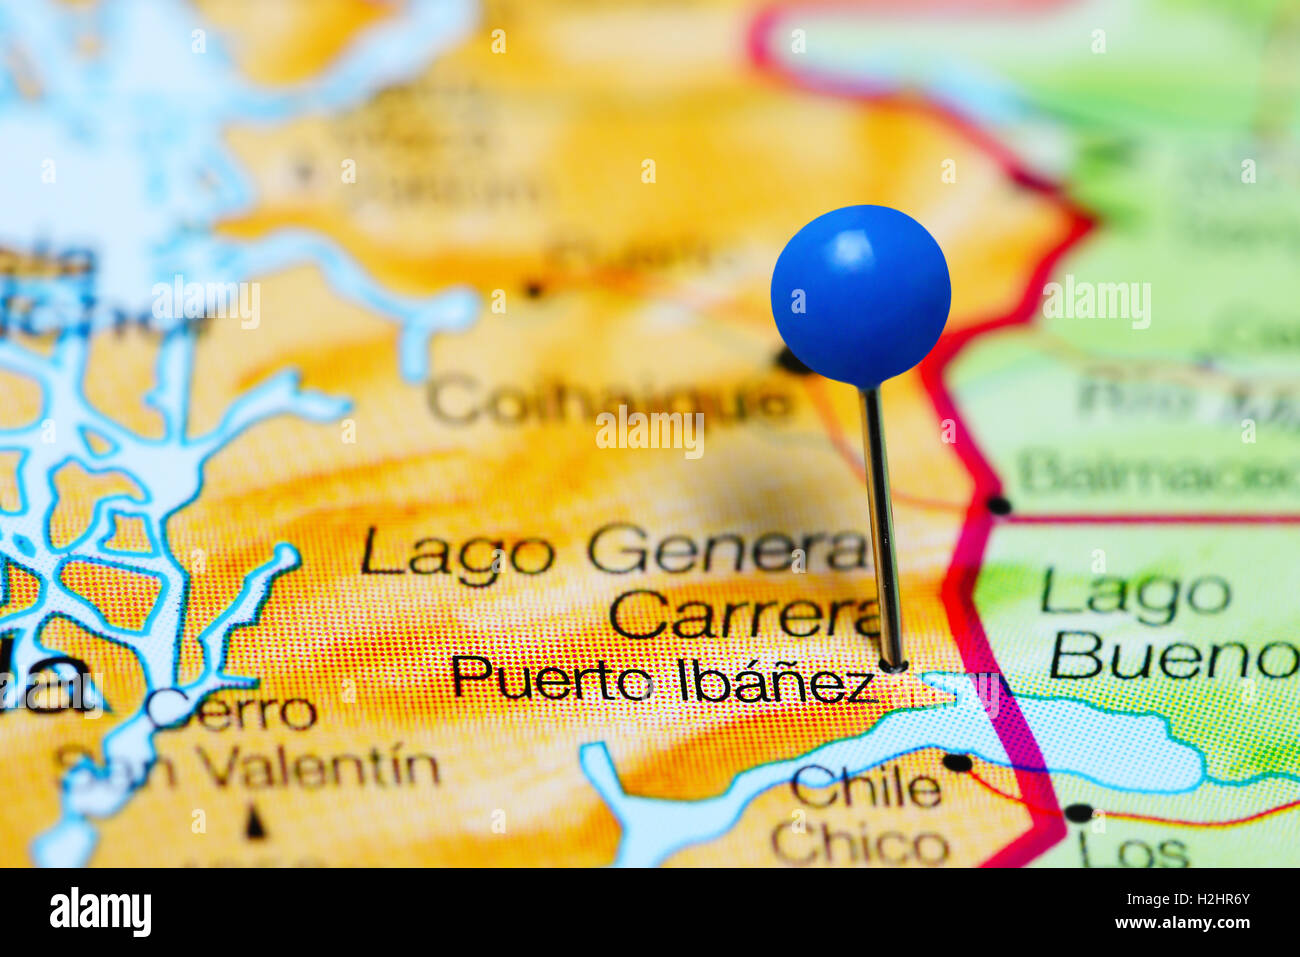 Puerto Ibanez pinned on a map of Chile Stock Photo